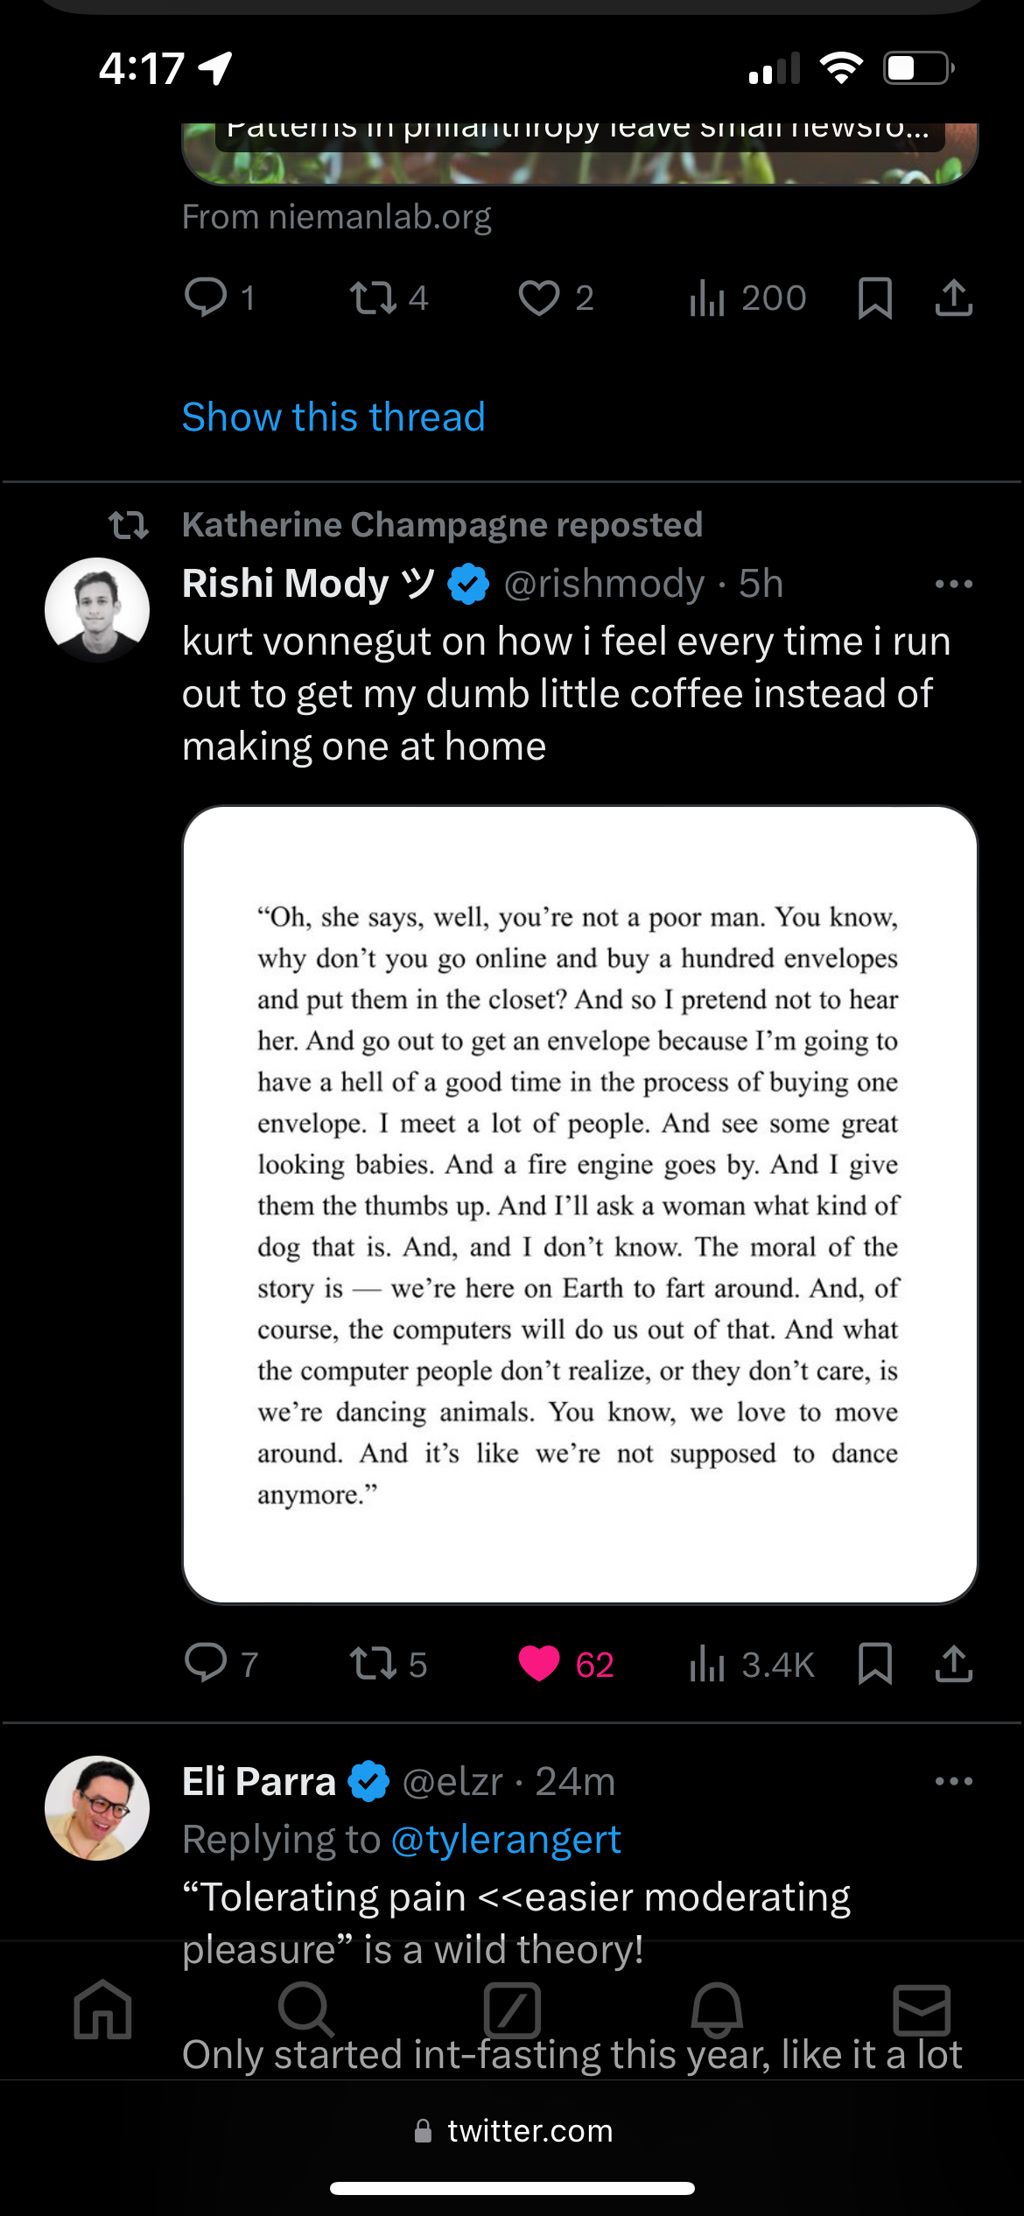 The content displays a user interface, likely from a Twitter feed, showcasing two posts. The first tweet by Rishi Mody with a verified blue checkmark includes a quote attributed to Kurt Vonnegut, expressing the delight and interactions experienced when venturing out for a simple task, such as buying an envelope, instead of conducting it over the internet. Mody relates it to running out to buy coffee rather than making it at home. The tweet received several engagements including retweets, likes, and comments. Below is a reply to another tweet by Eli Parra, also with a verified checkmark, discussing the concept of tolerating pain versus the easier moderation of pleasure, making a reference to intermittent fasting and noting personal enjoyment in it.